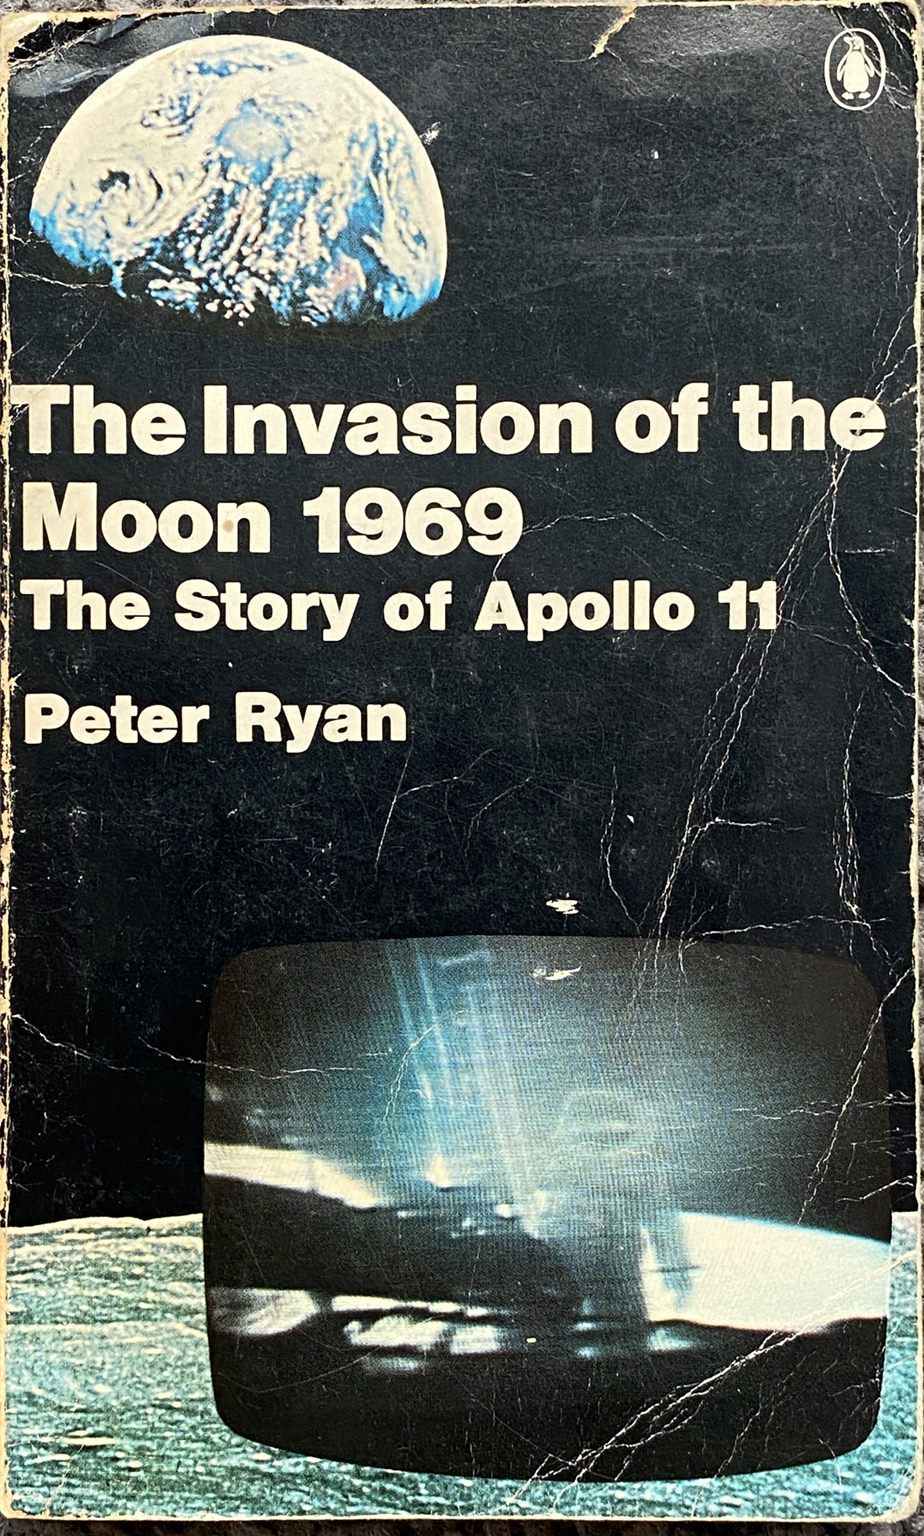 THE INVASION OF THE MOON 1969: The Story of Apollo 11